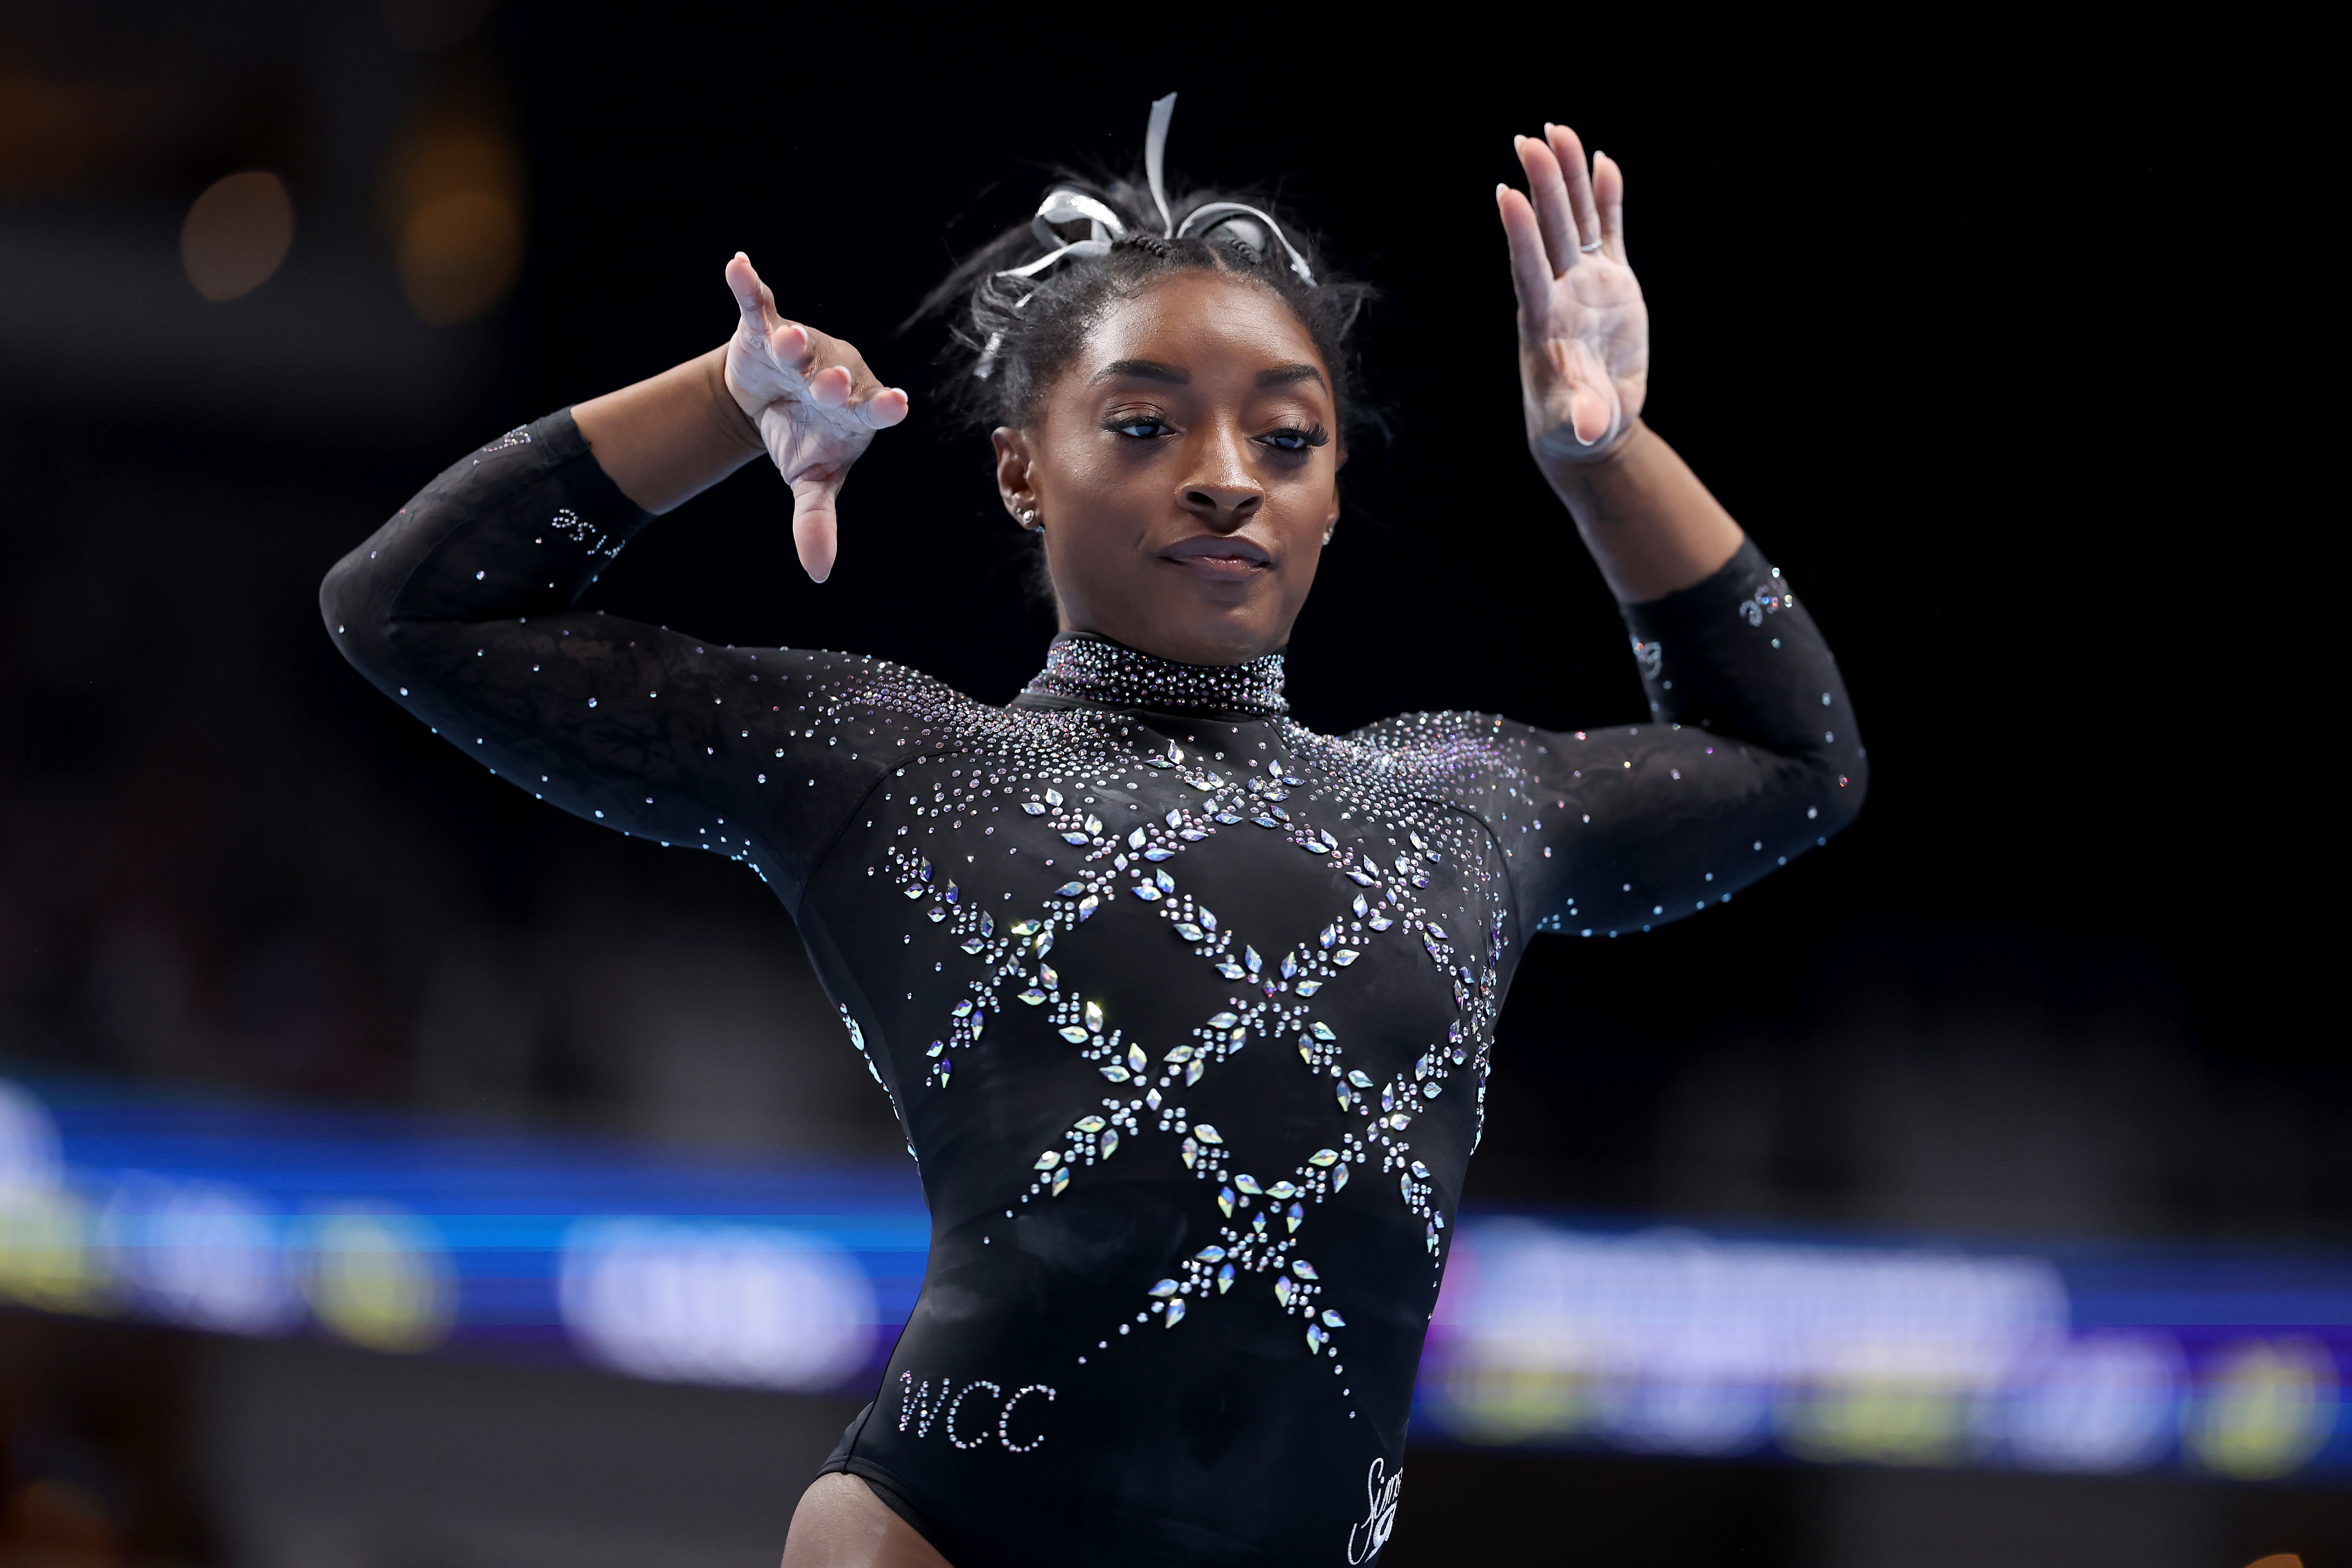 Artistic Gymnastics: Race for U.S. squad heats up with team announcement  150 days away